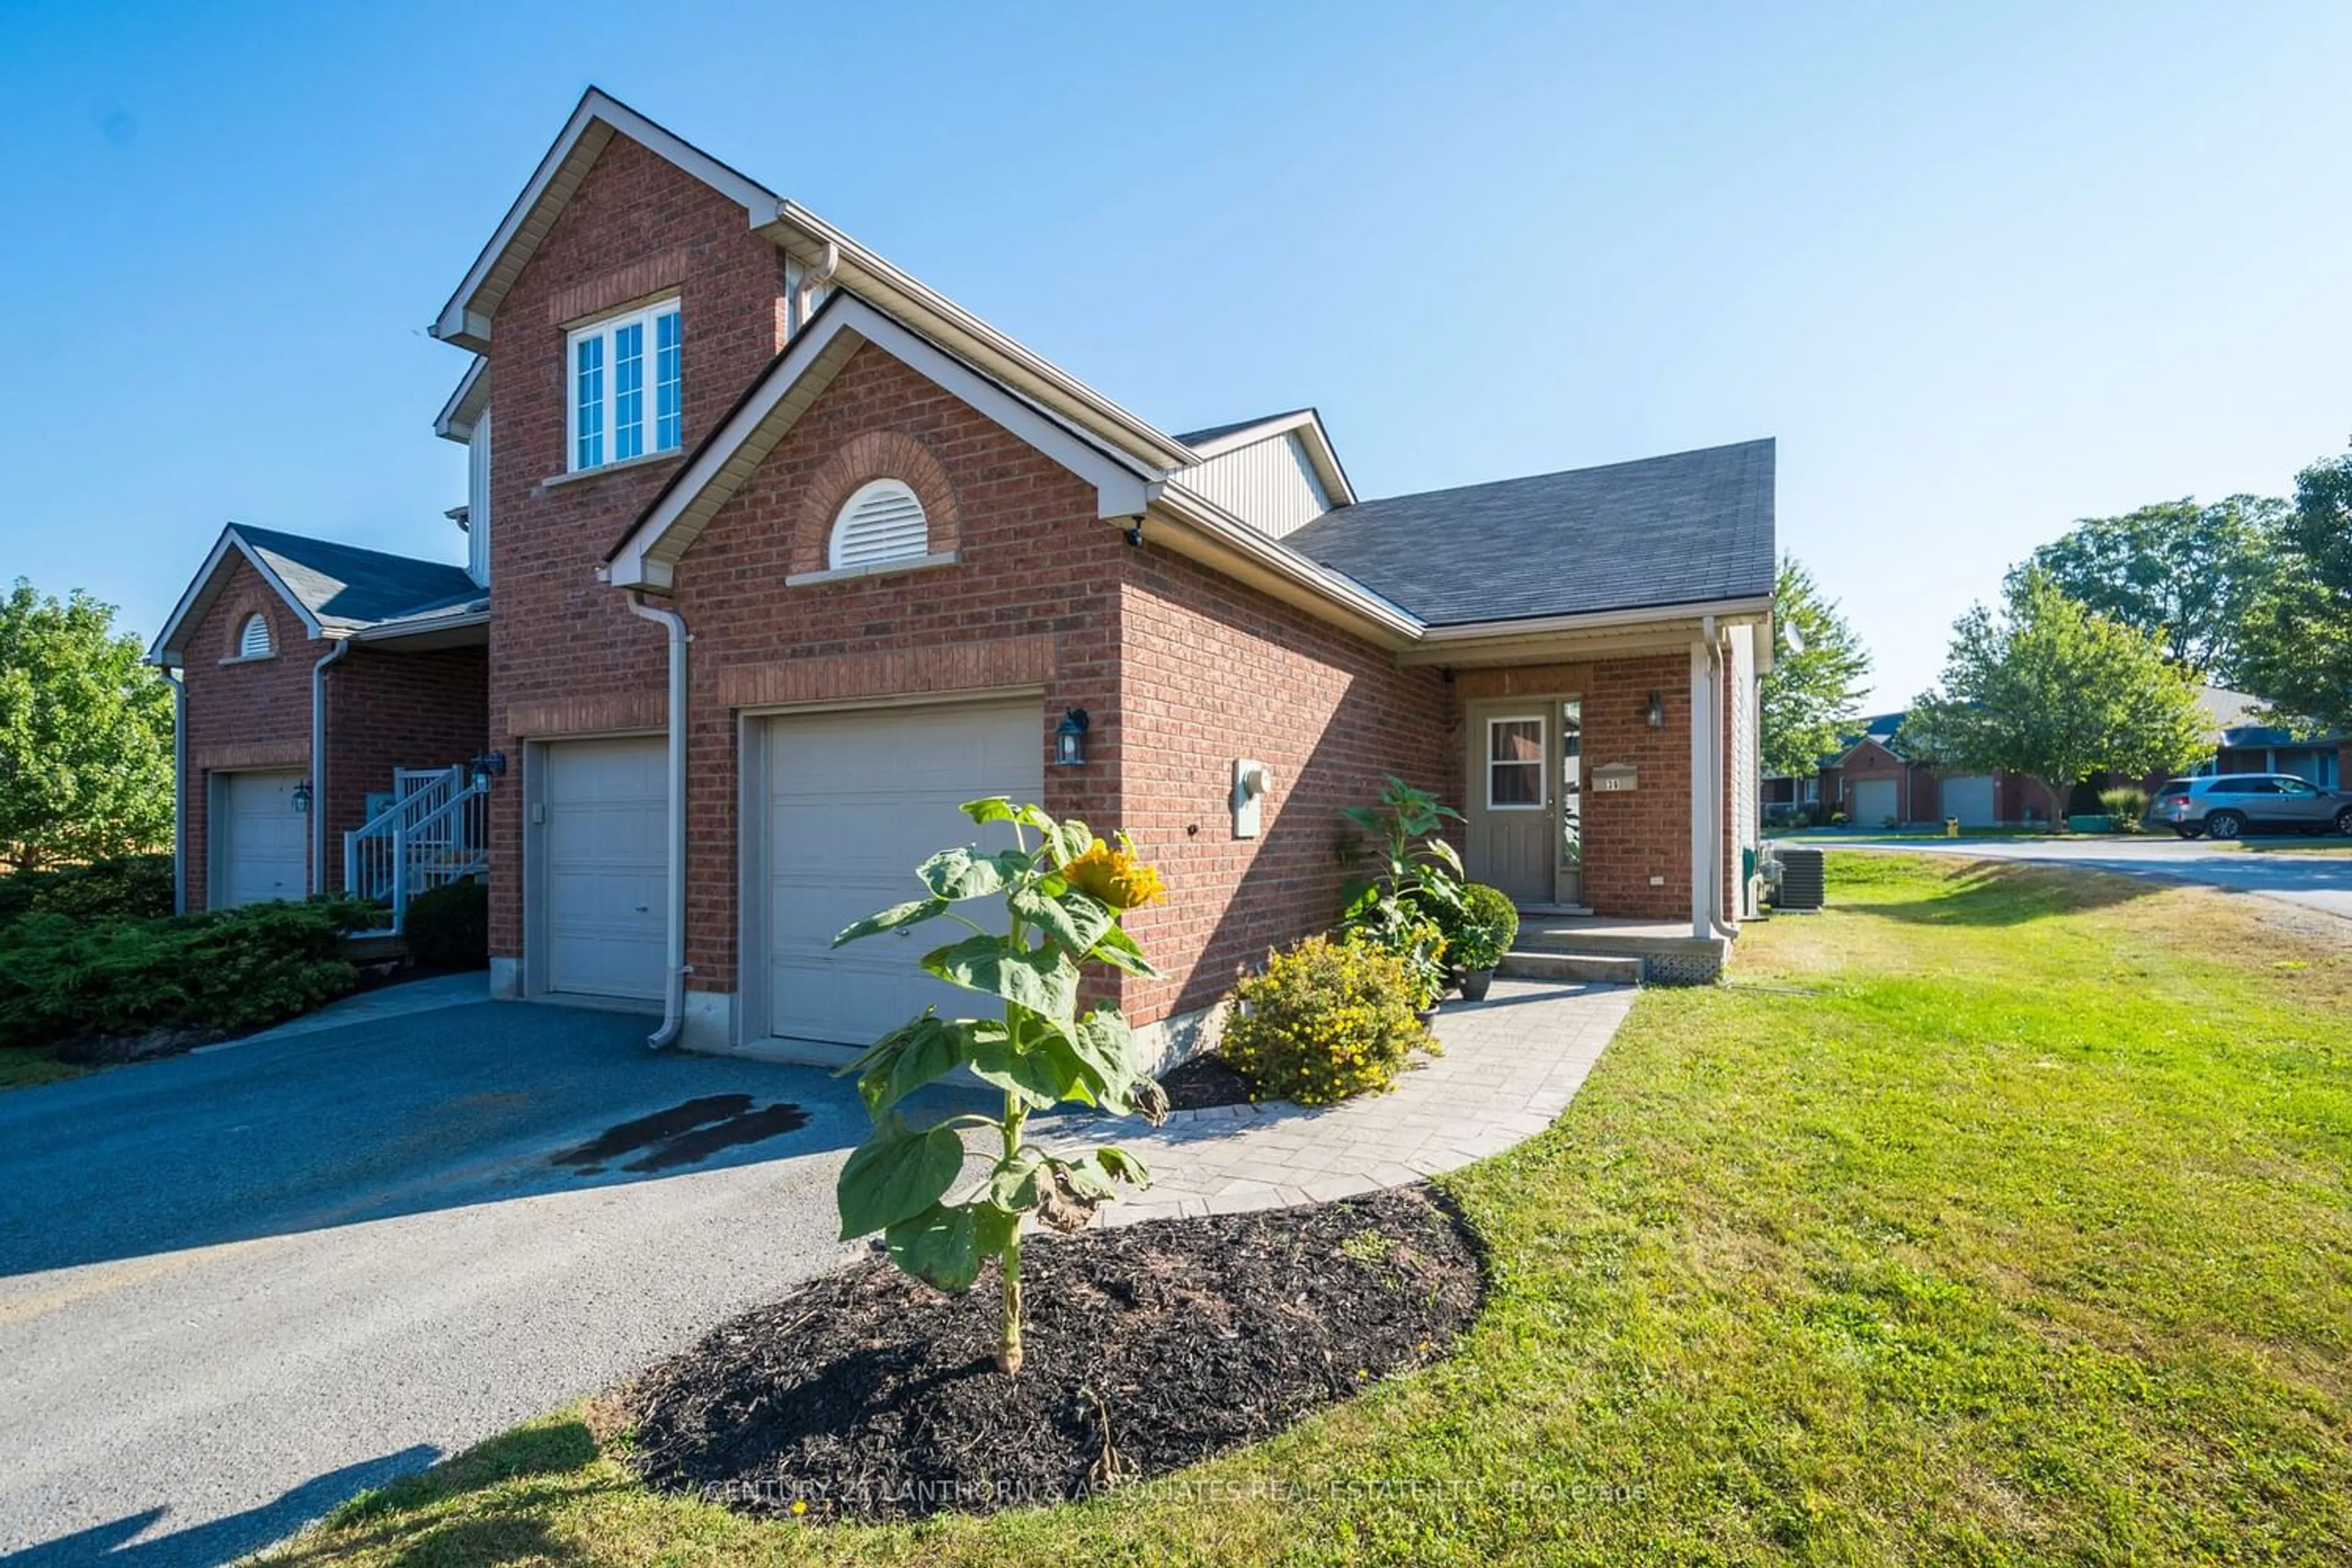 Home with brick exterior material for 39 Albion St #4, Belleville Ontario K8N 3R7